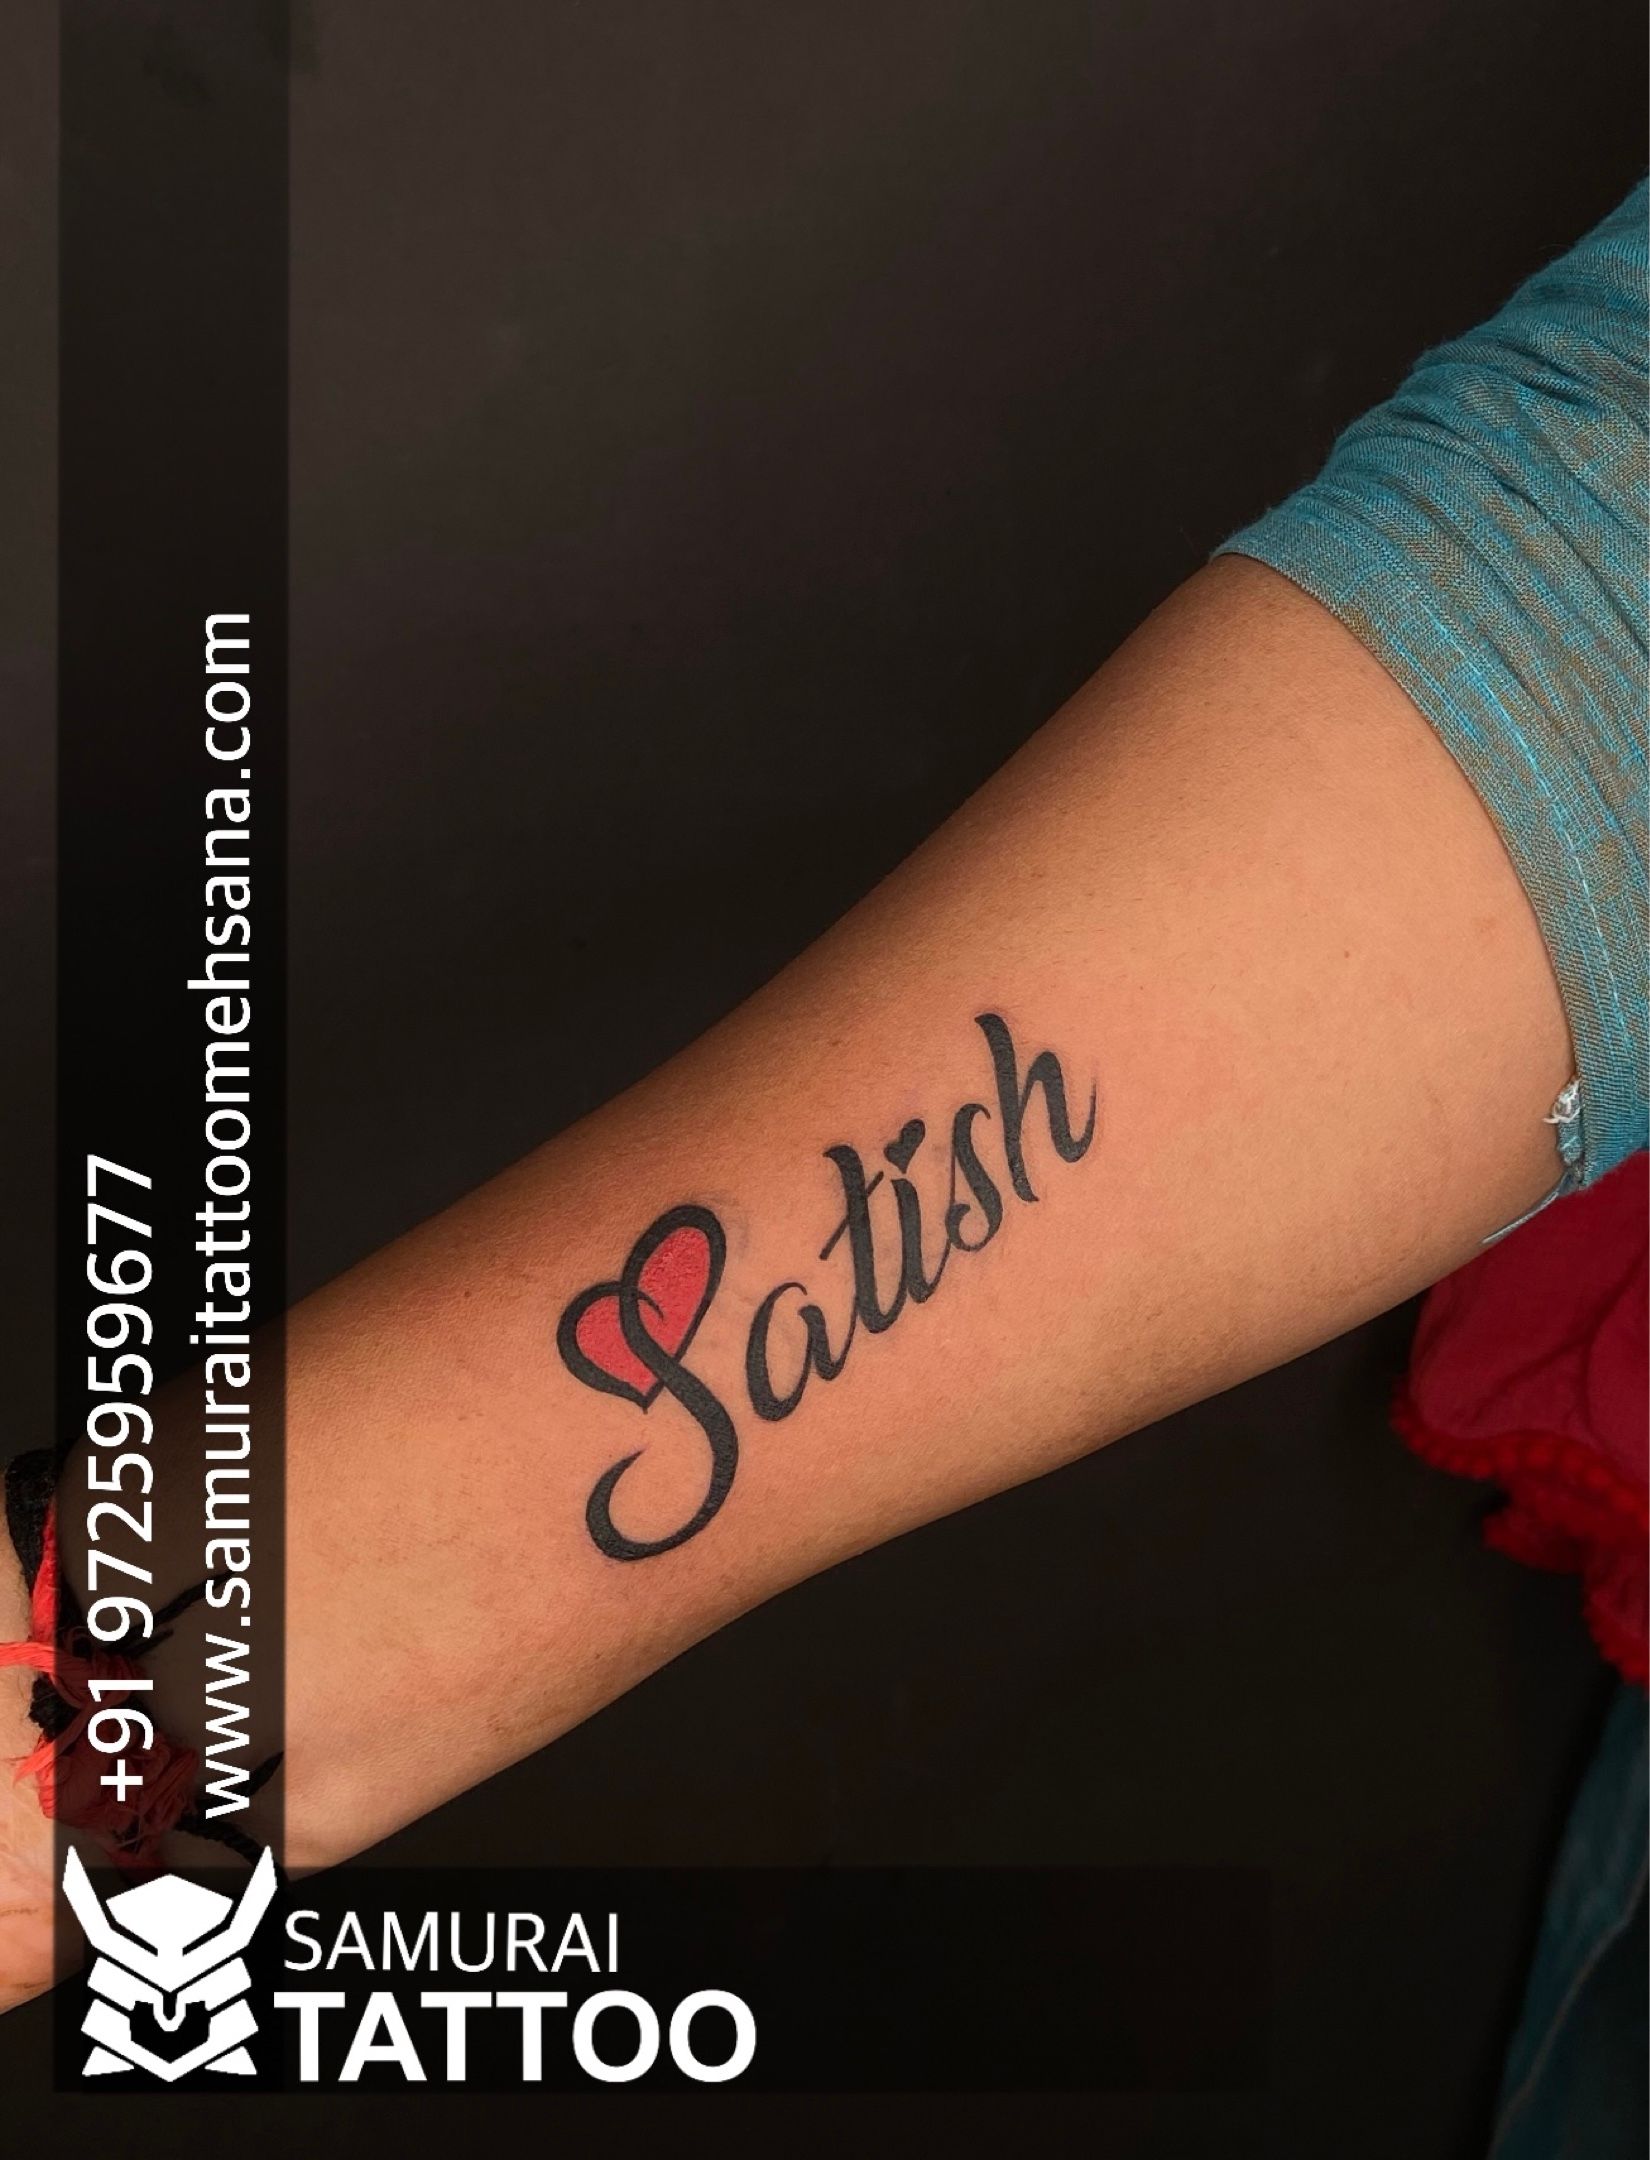 Gp Tattoos  valentine gift for his gf  her name swati  Happy Valentine  day   Facebook